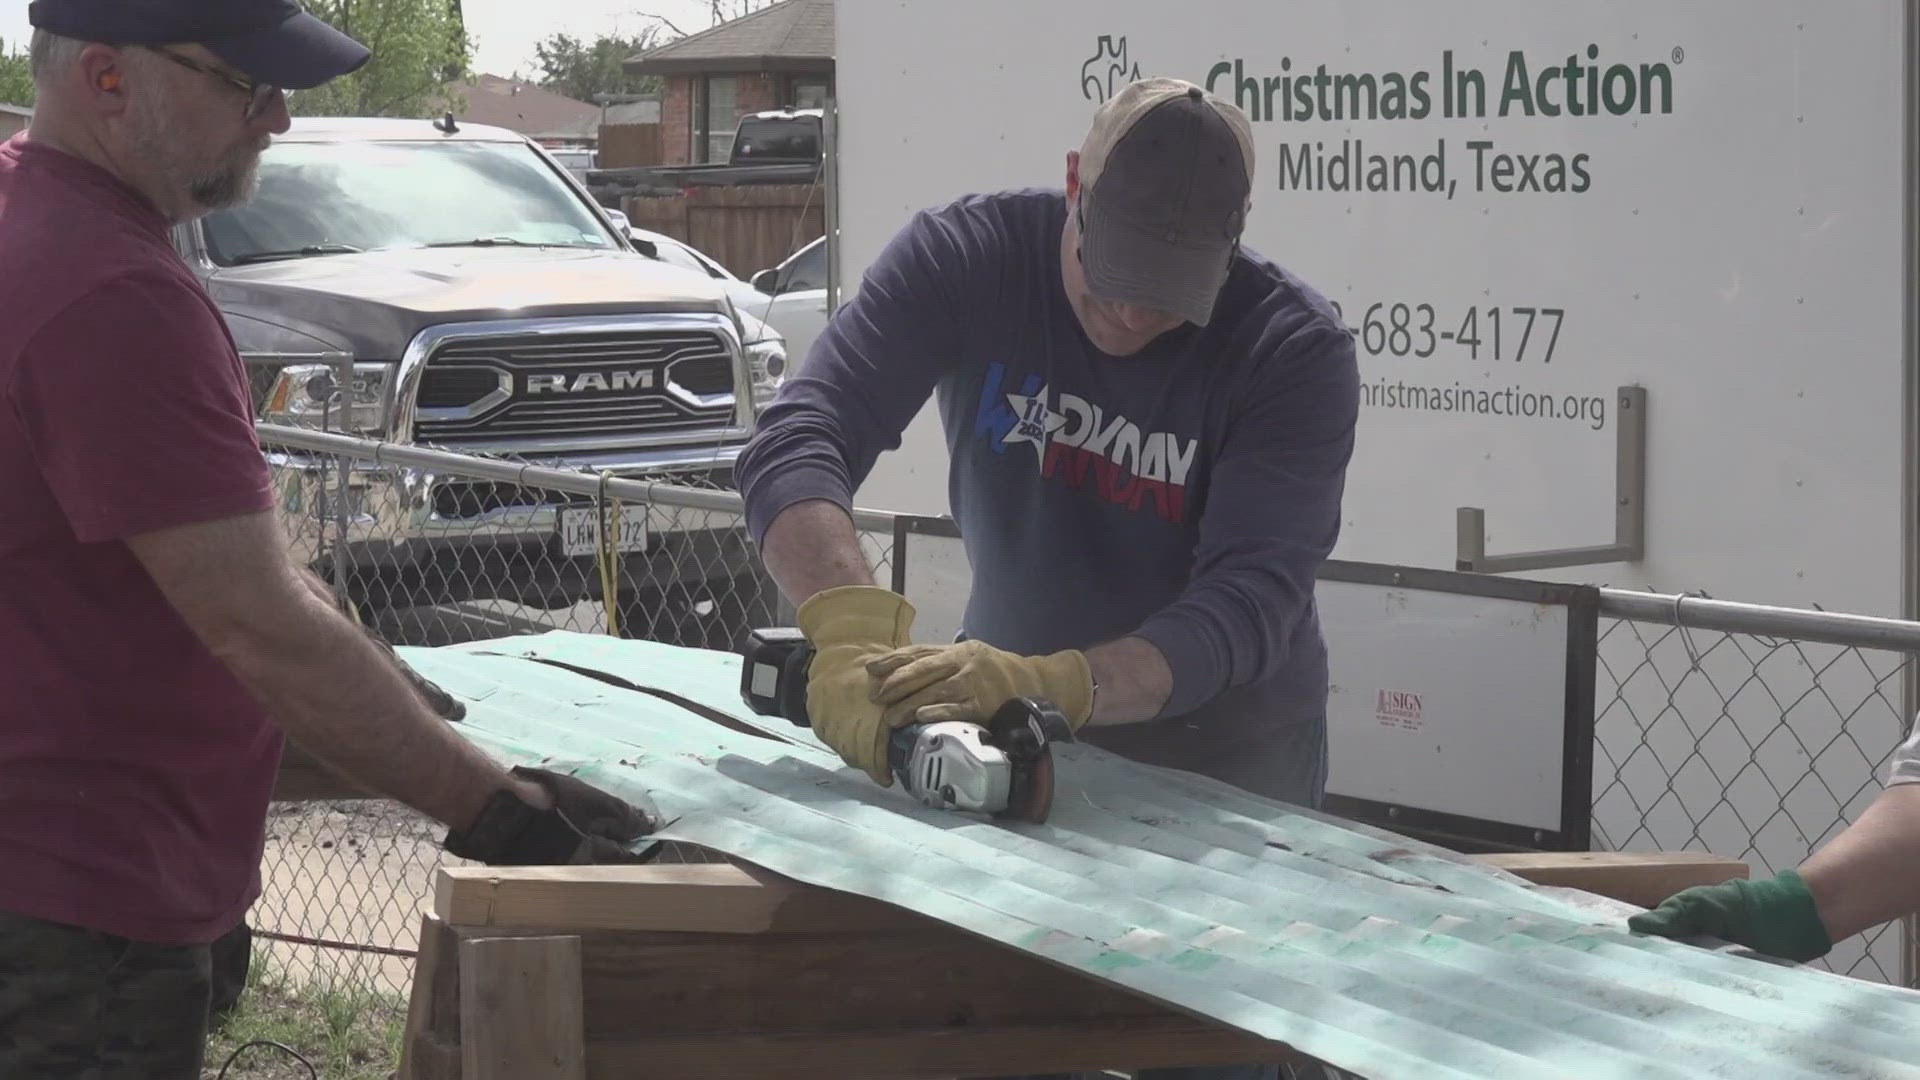 The Midland Rotary Club and the Christmas in Action had teamed up to help fix up a home.